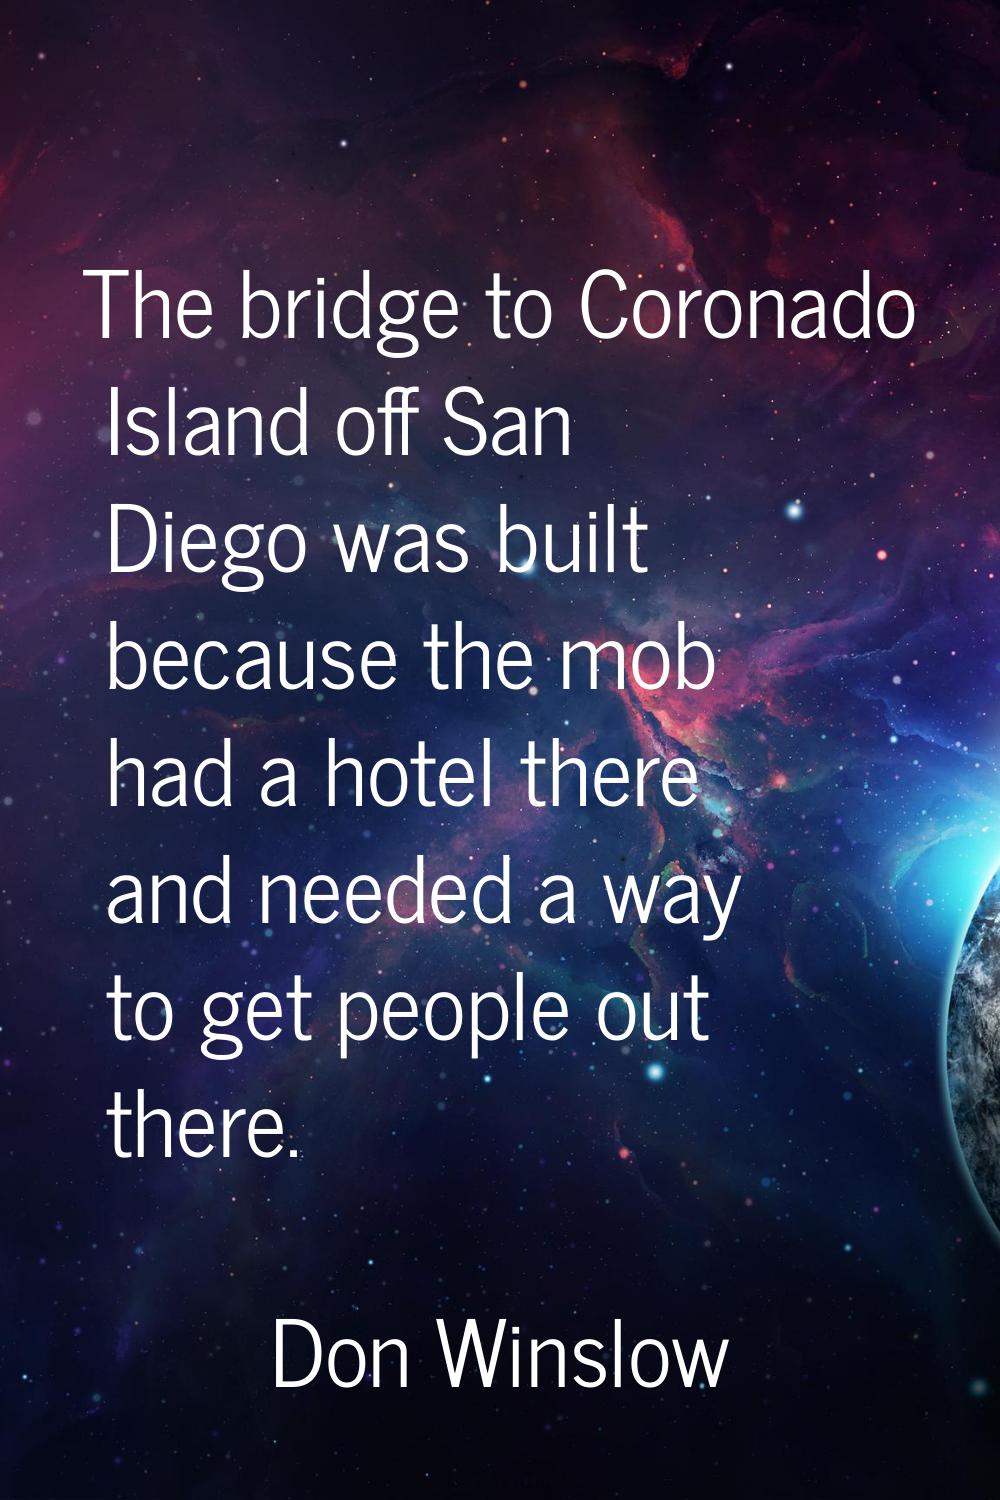 The bridge to Coronado Island off San Diego was built because the mob had a hotel there and needed 